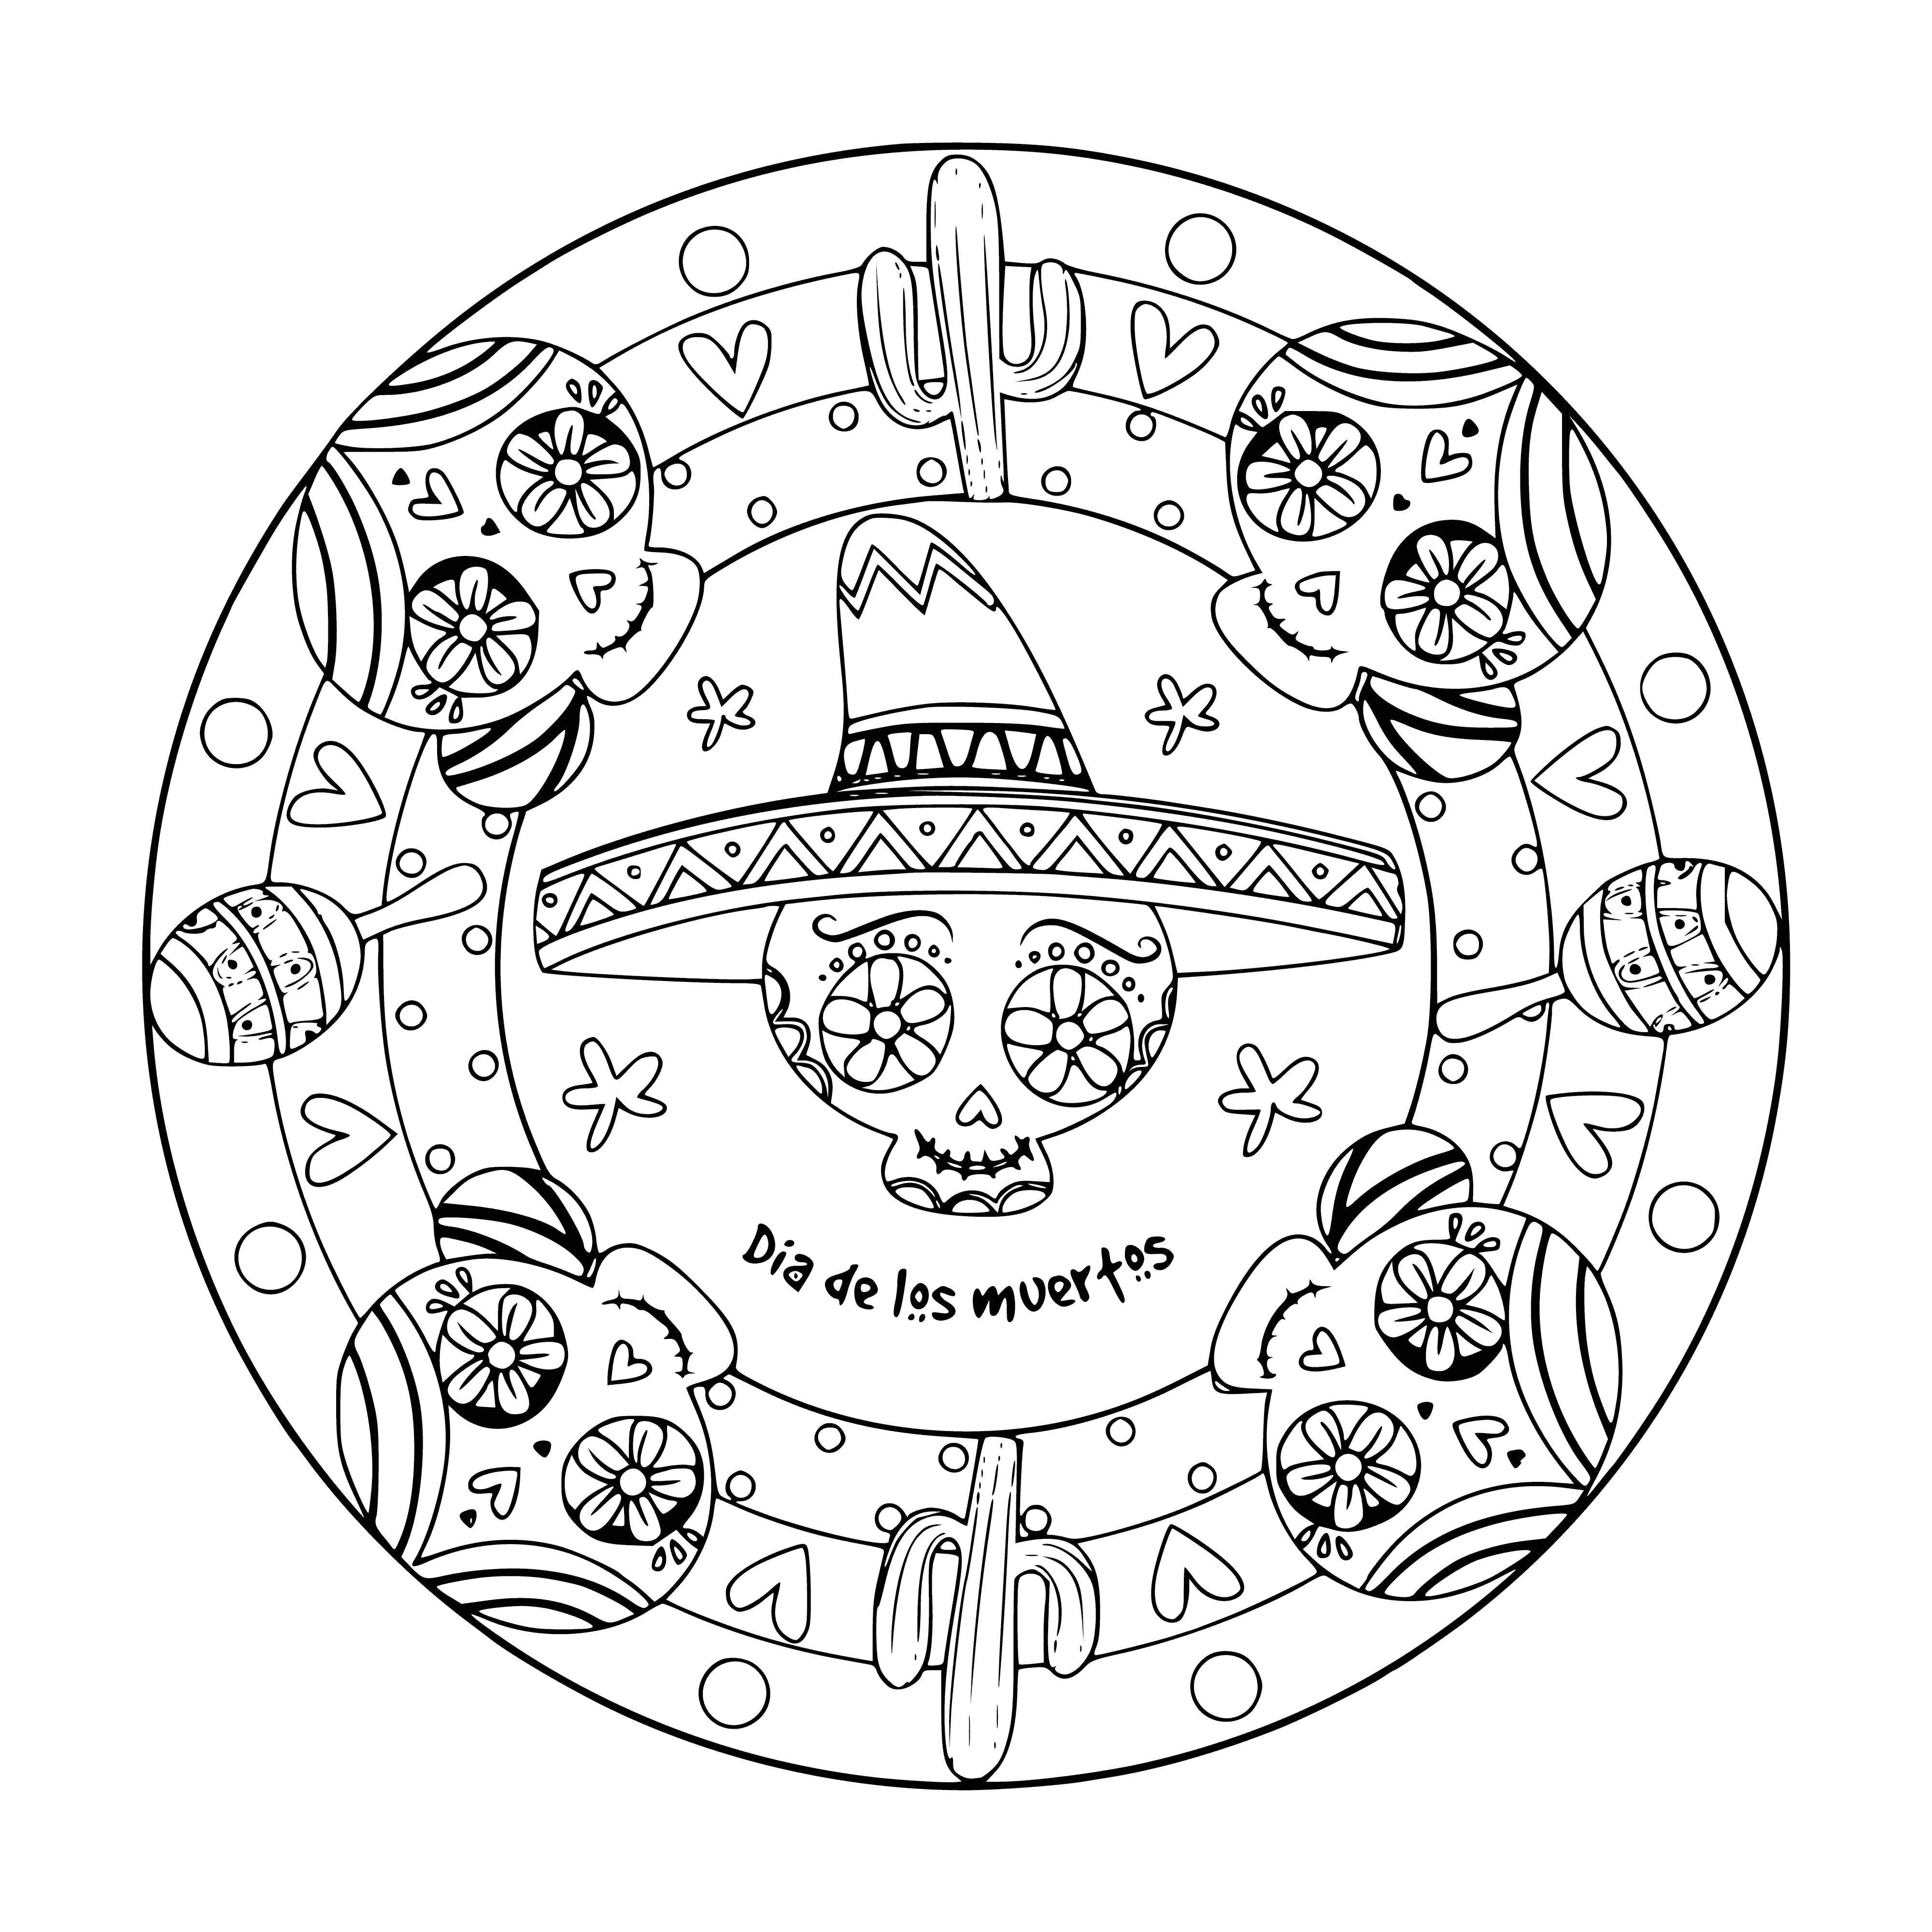 coloring page: Perfect for a calm, spooky night. 

Create a spooky mandala with bats, spiders, ghosts, and pumpkins for a peaceful Halloween night.